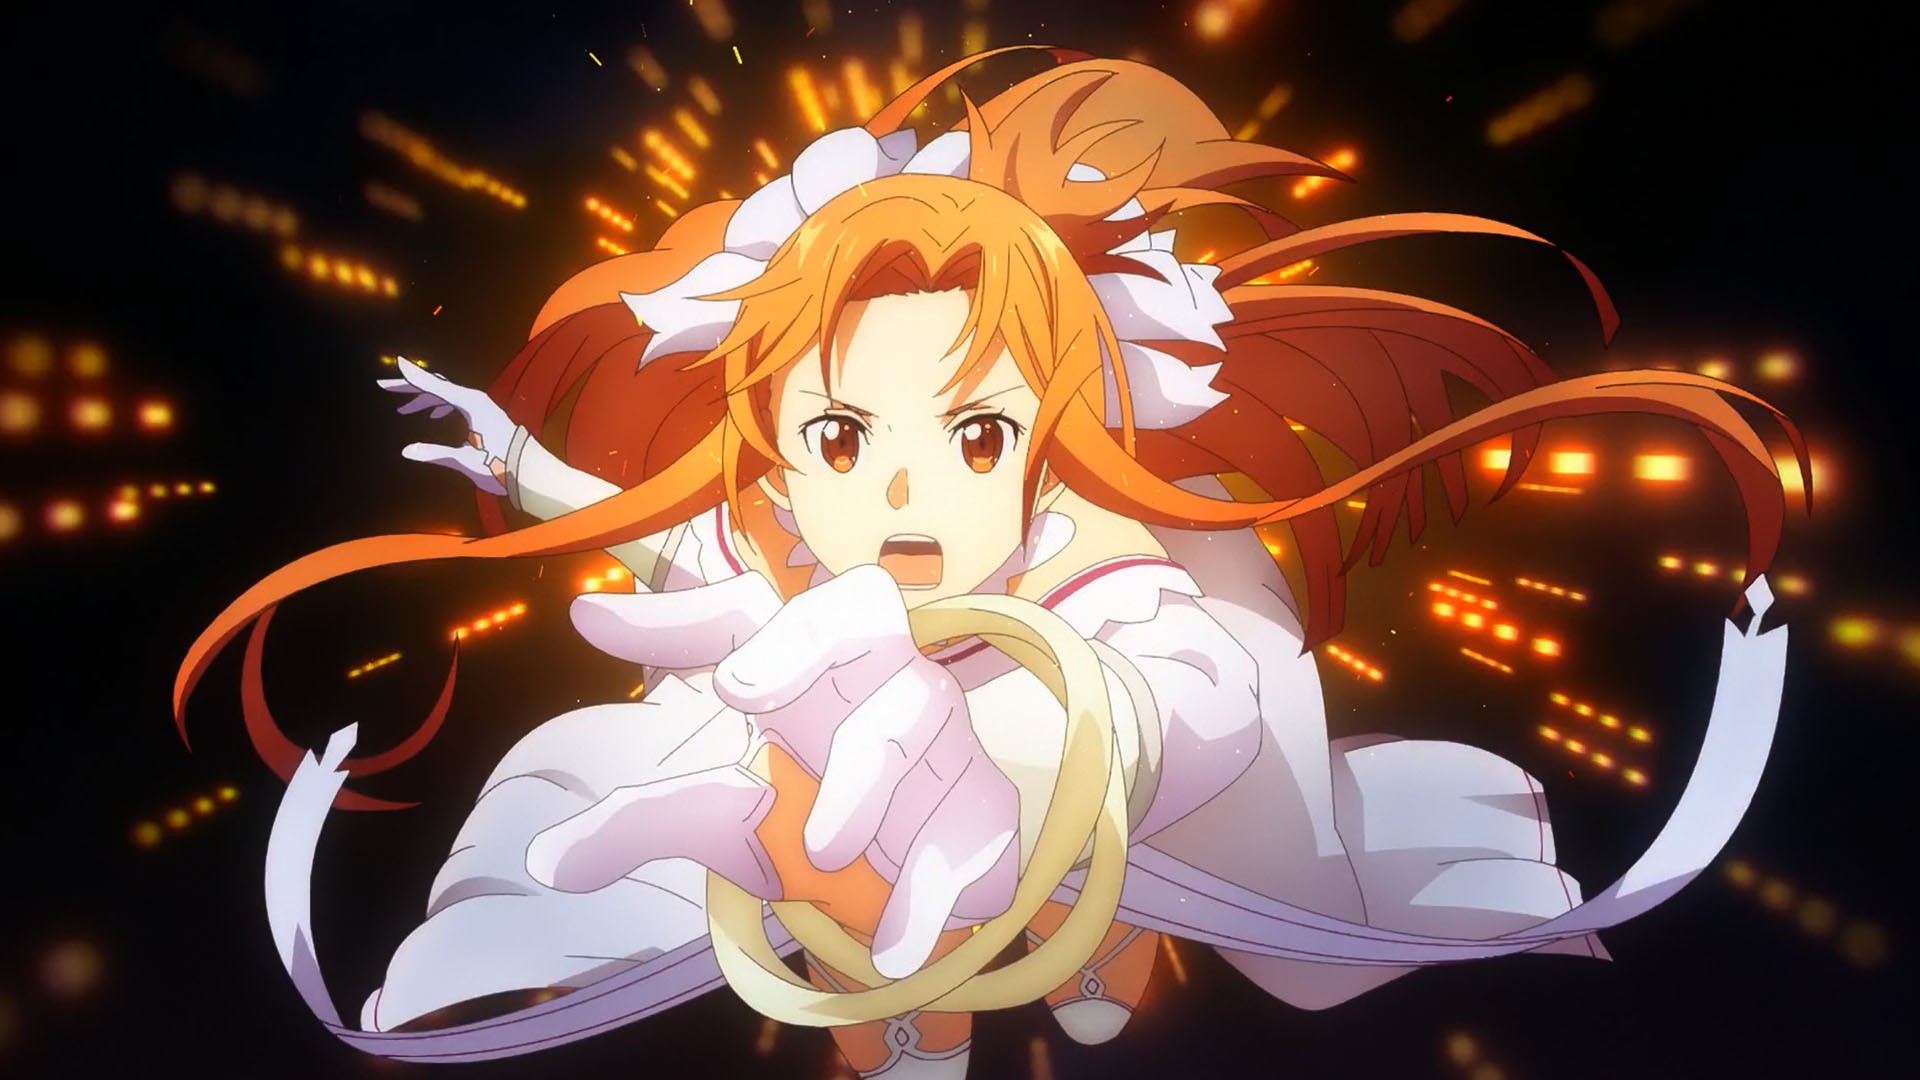 Sword Art Online Season 5: Release Date, Storyline and Much More